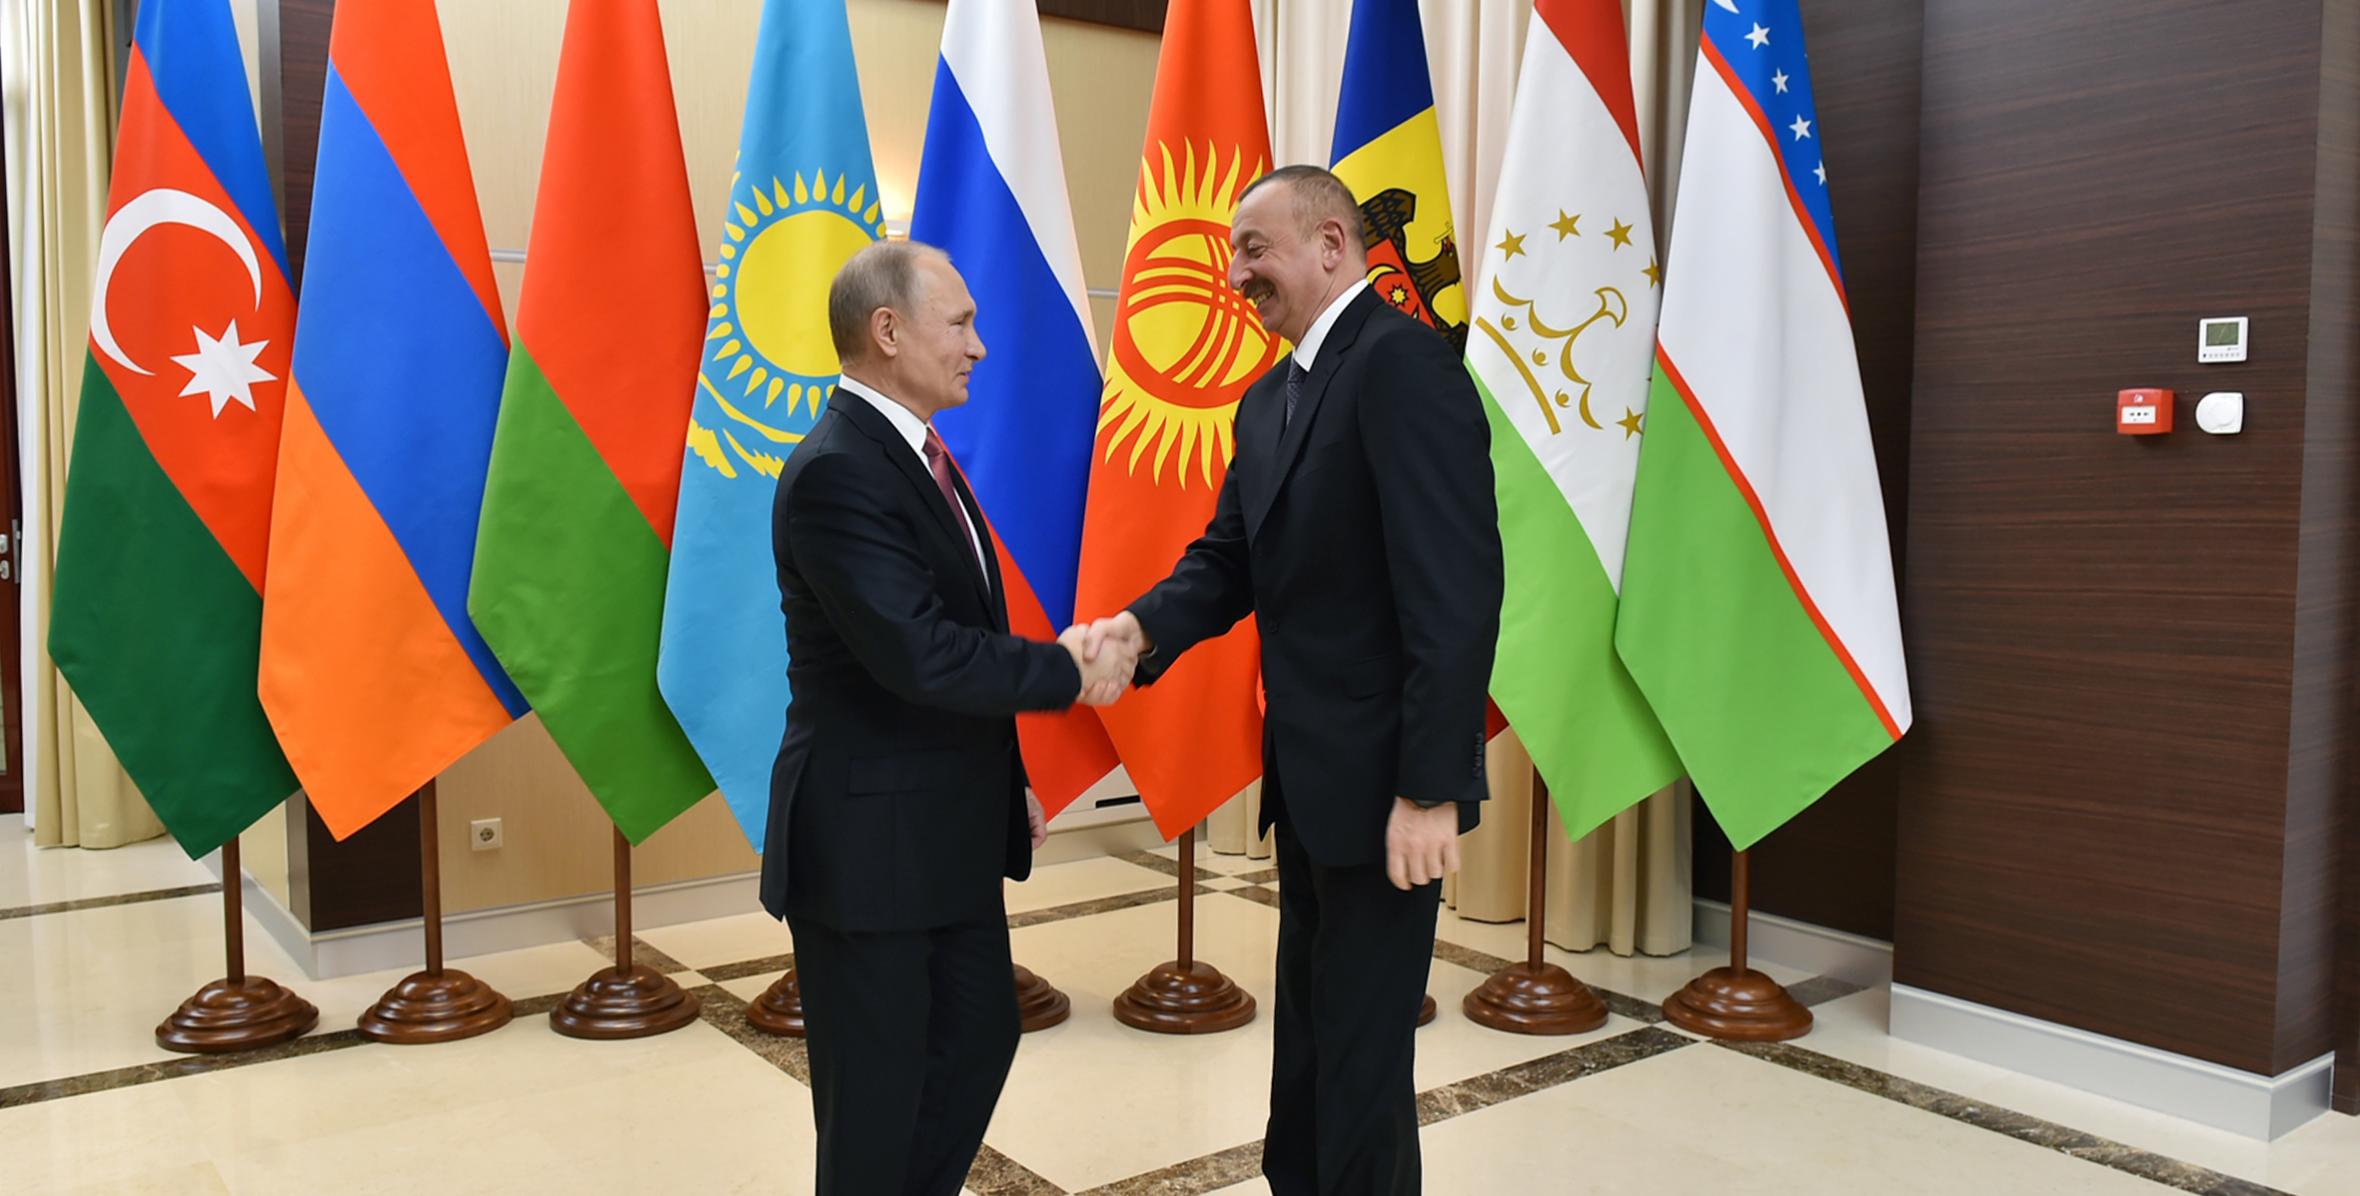 Ilham Aliyev attended informal meeting of the CIS heads of state in Moscow